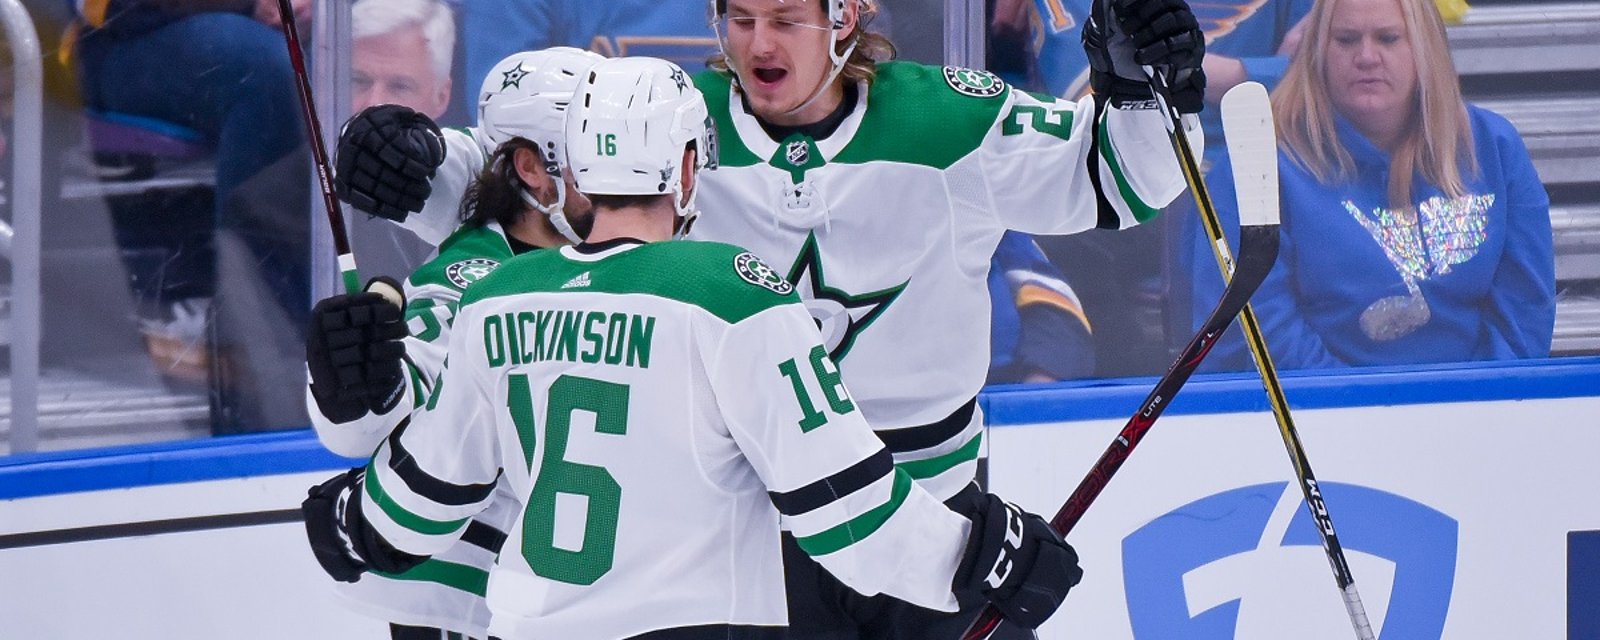 Stars appear to lose another player to injury just minutes before Game 5.